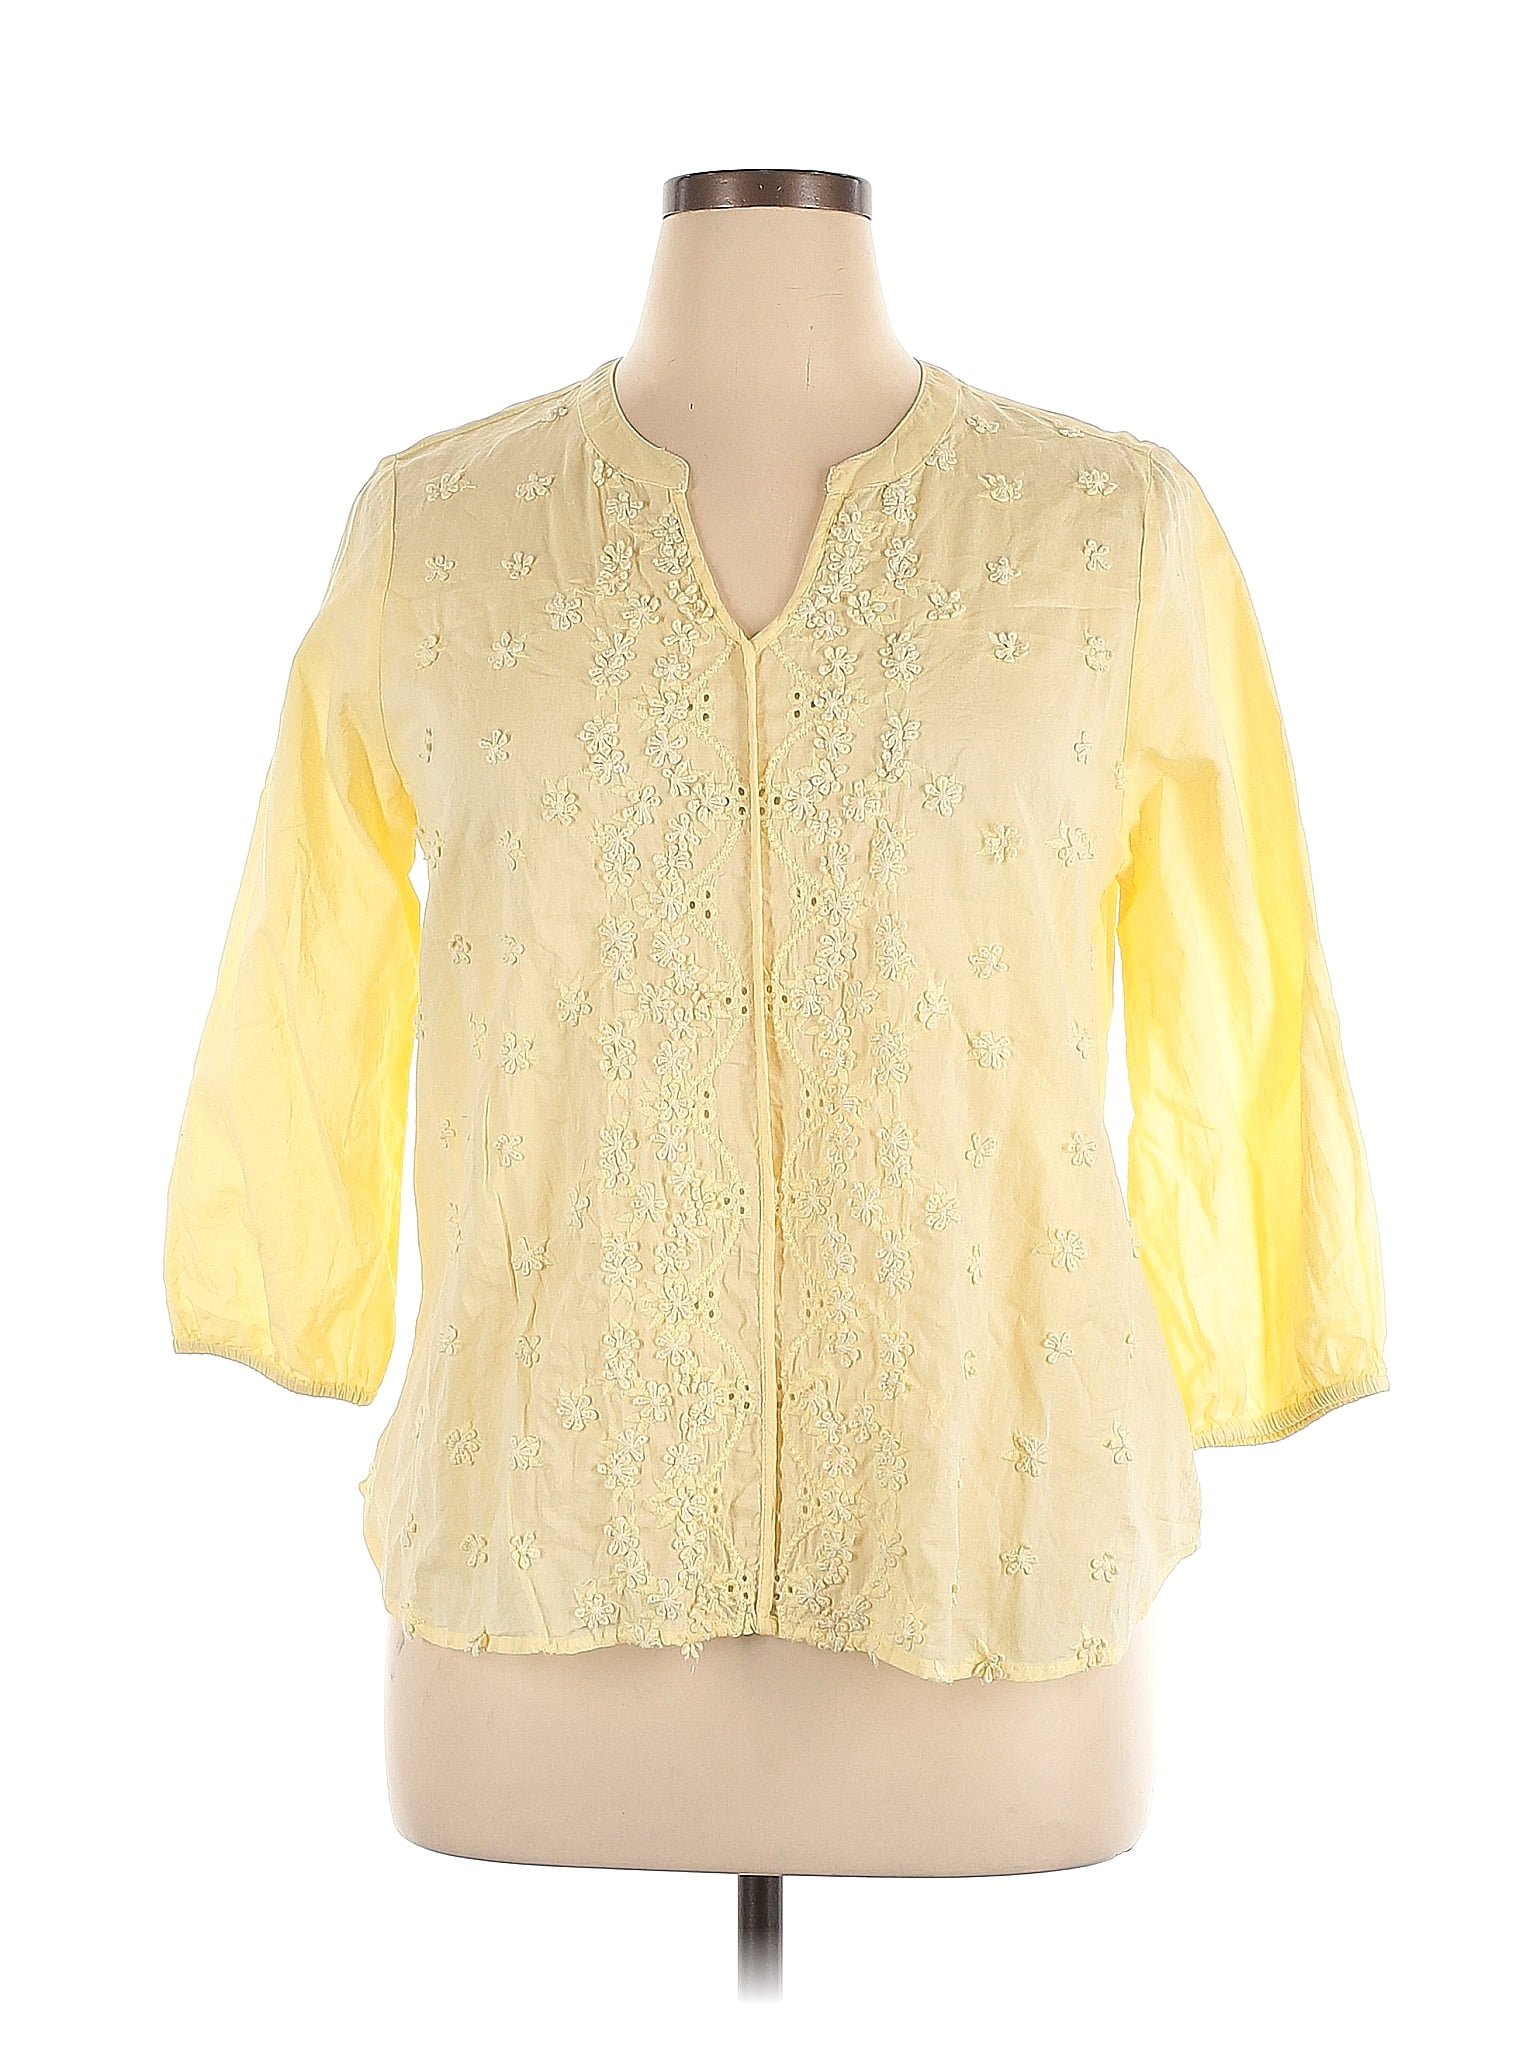 Intro 100% Cotton Floral Yellow Long Sleeve Blouse Size XL (Petite